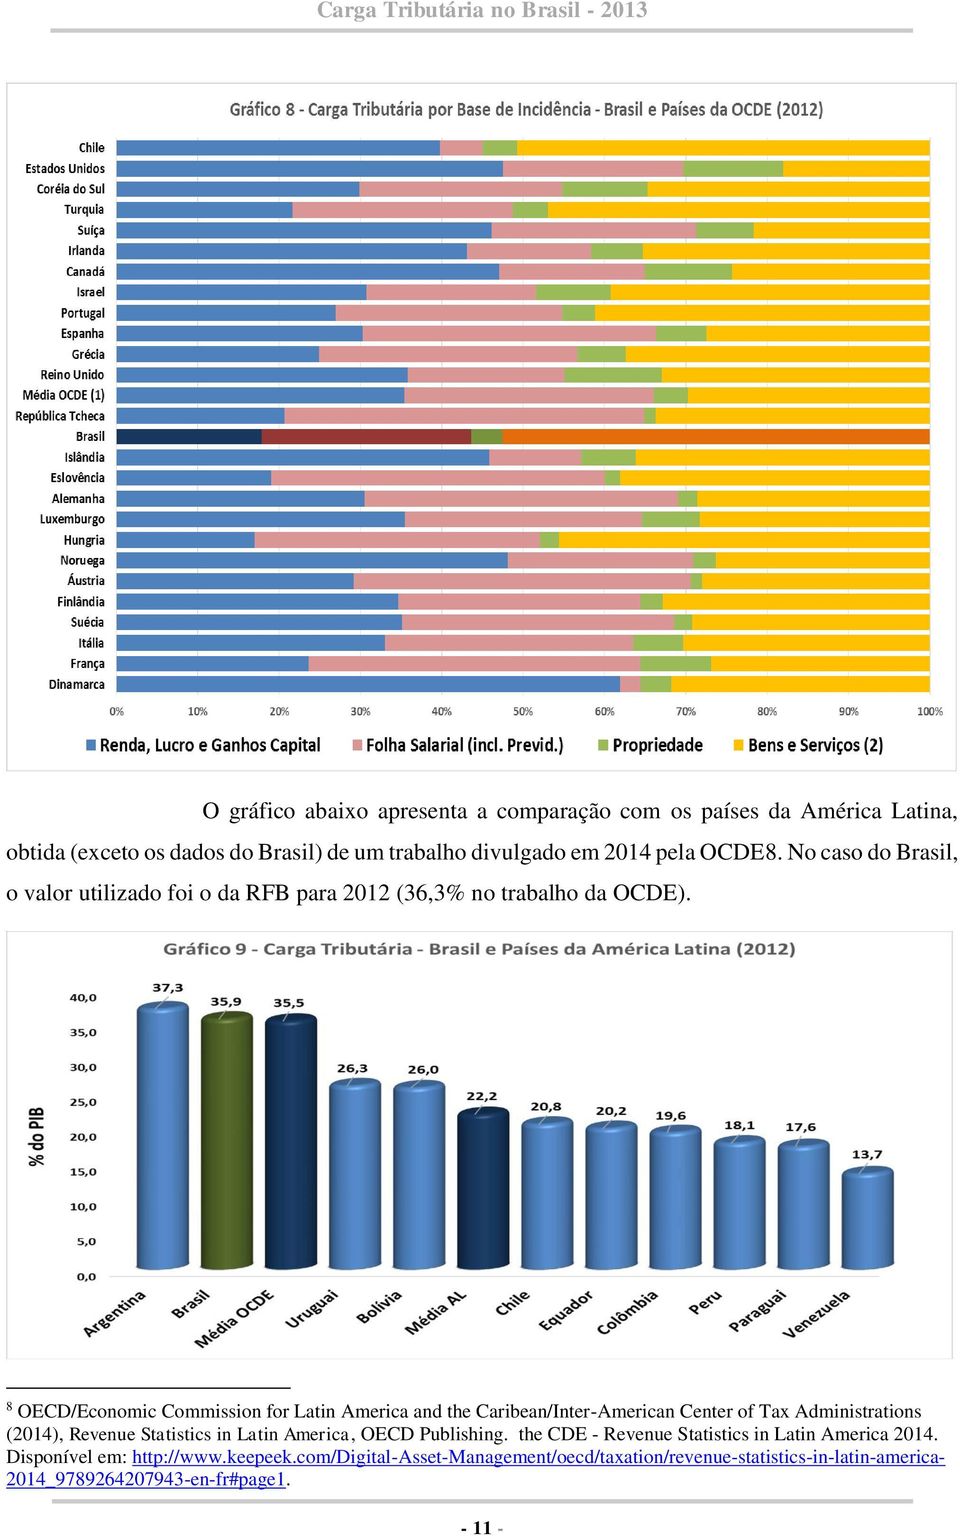 8 OECD/Economic Commission for Latin America and the Caribean/Inter-American Center of Tax Administrations (2014), Revenue Statistics in Latin America,